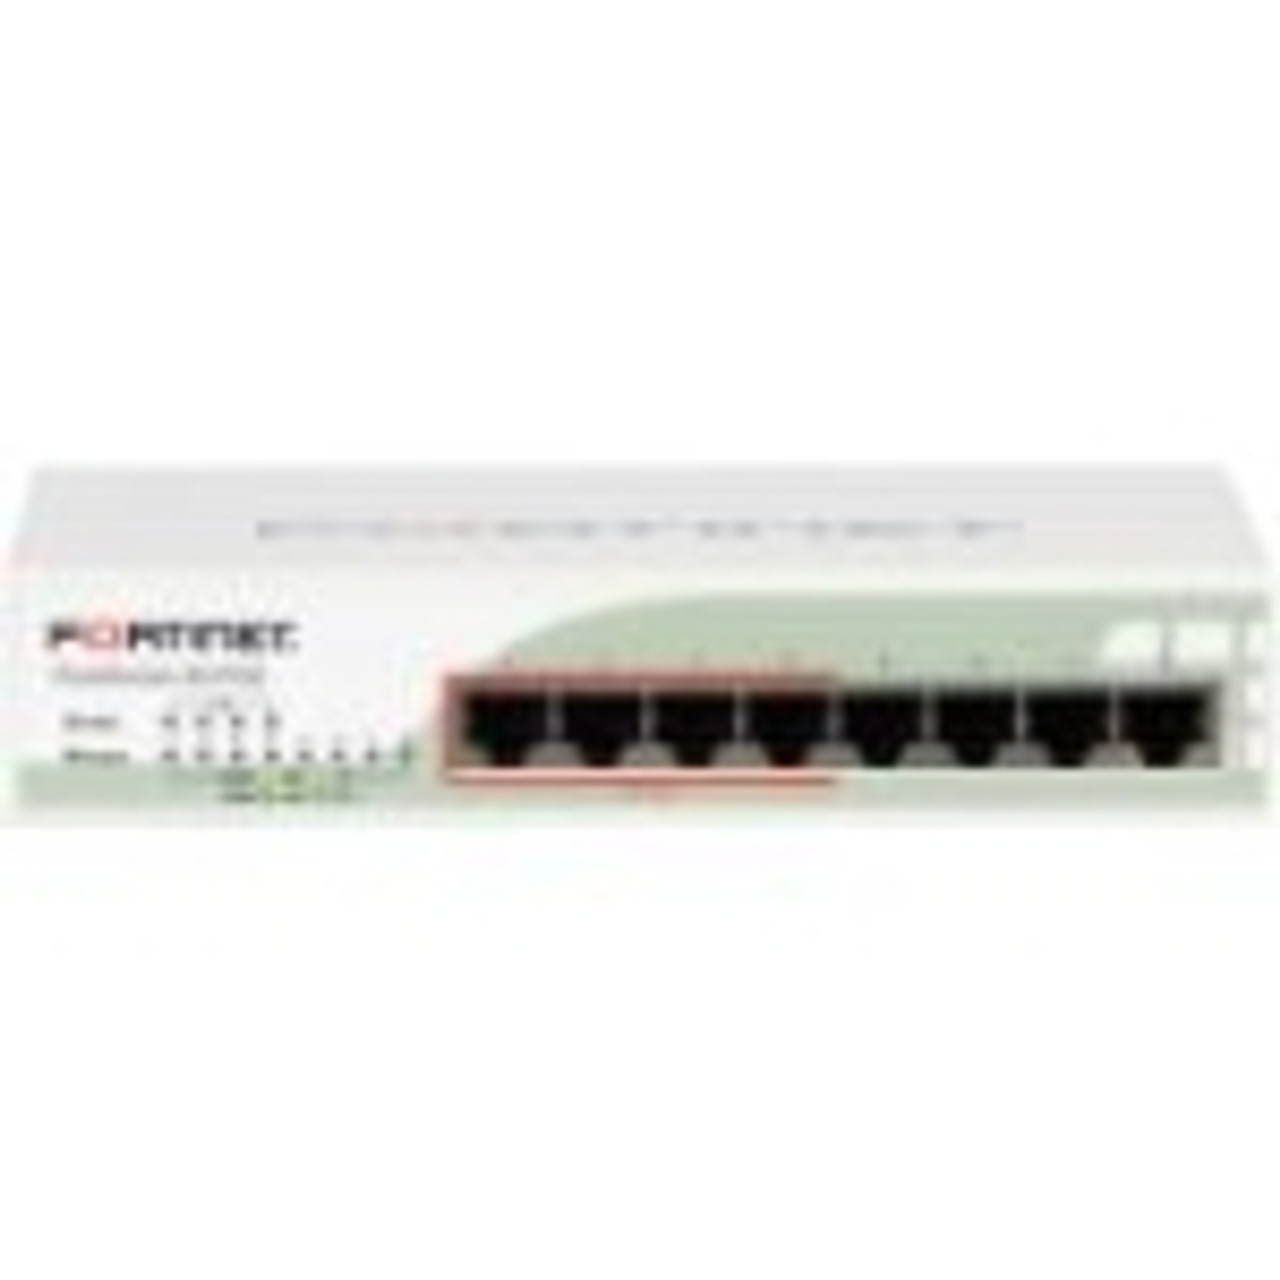 FS-80-POE-NFR Fortinet FortiSwitch 80-POE Ethernet Switch 8 Ports 10/100/1000Base-T 8 x Network Twisted Pair Gigabit Ethernet 2 Layer Supported Desktop